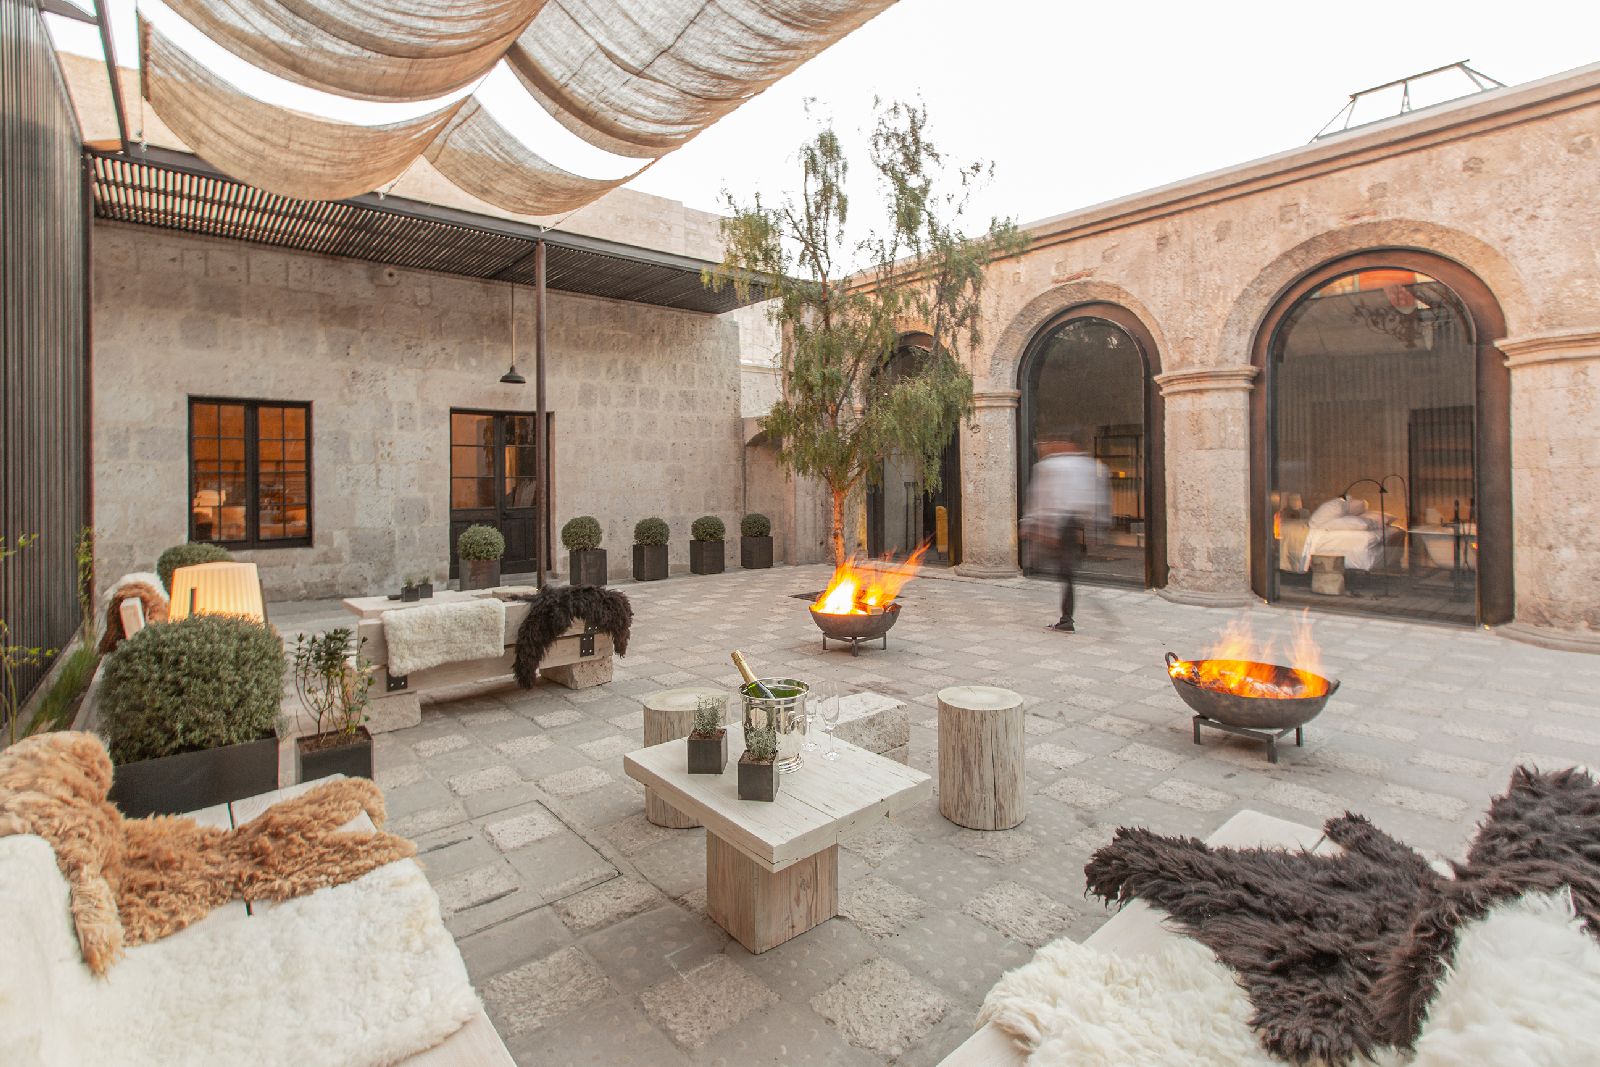 Courtyard and firepits at Cirqa hotel in Arequipa Peru